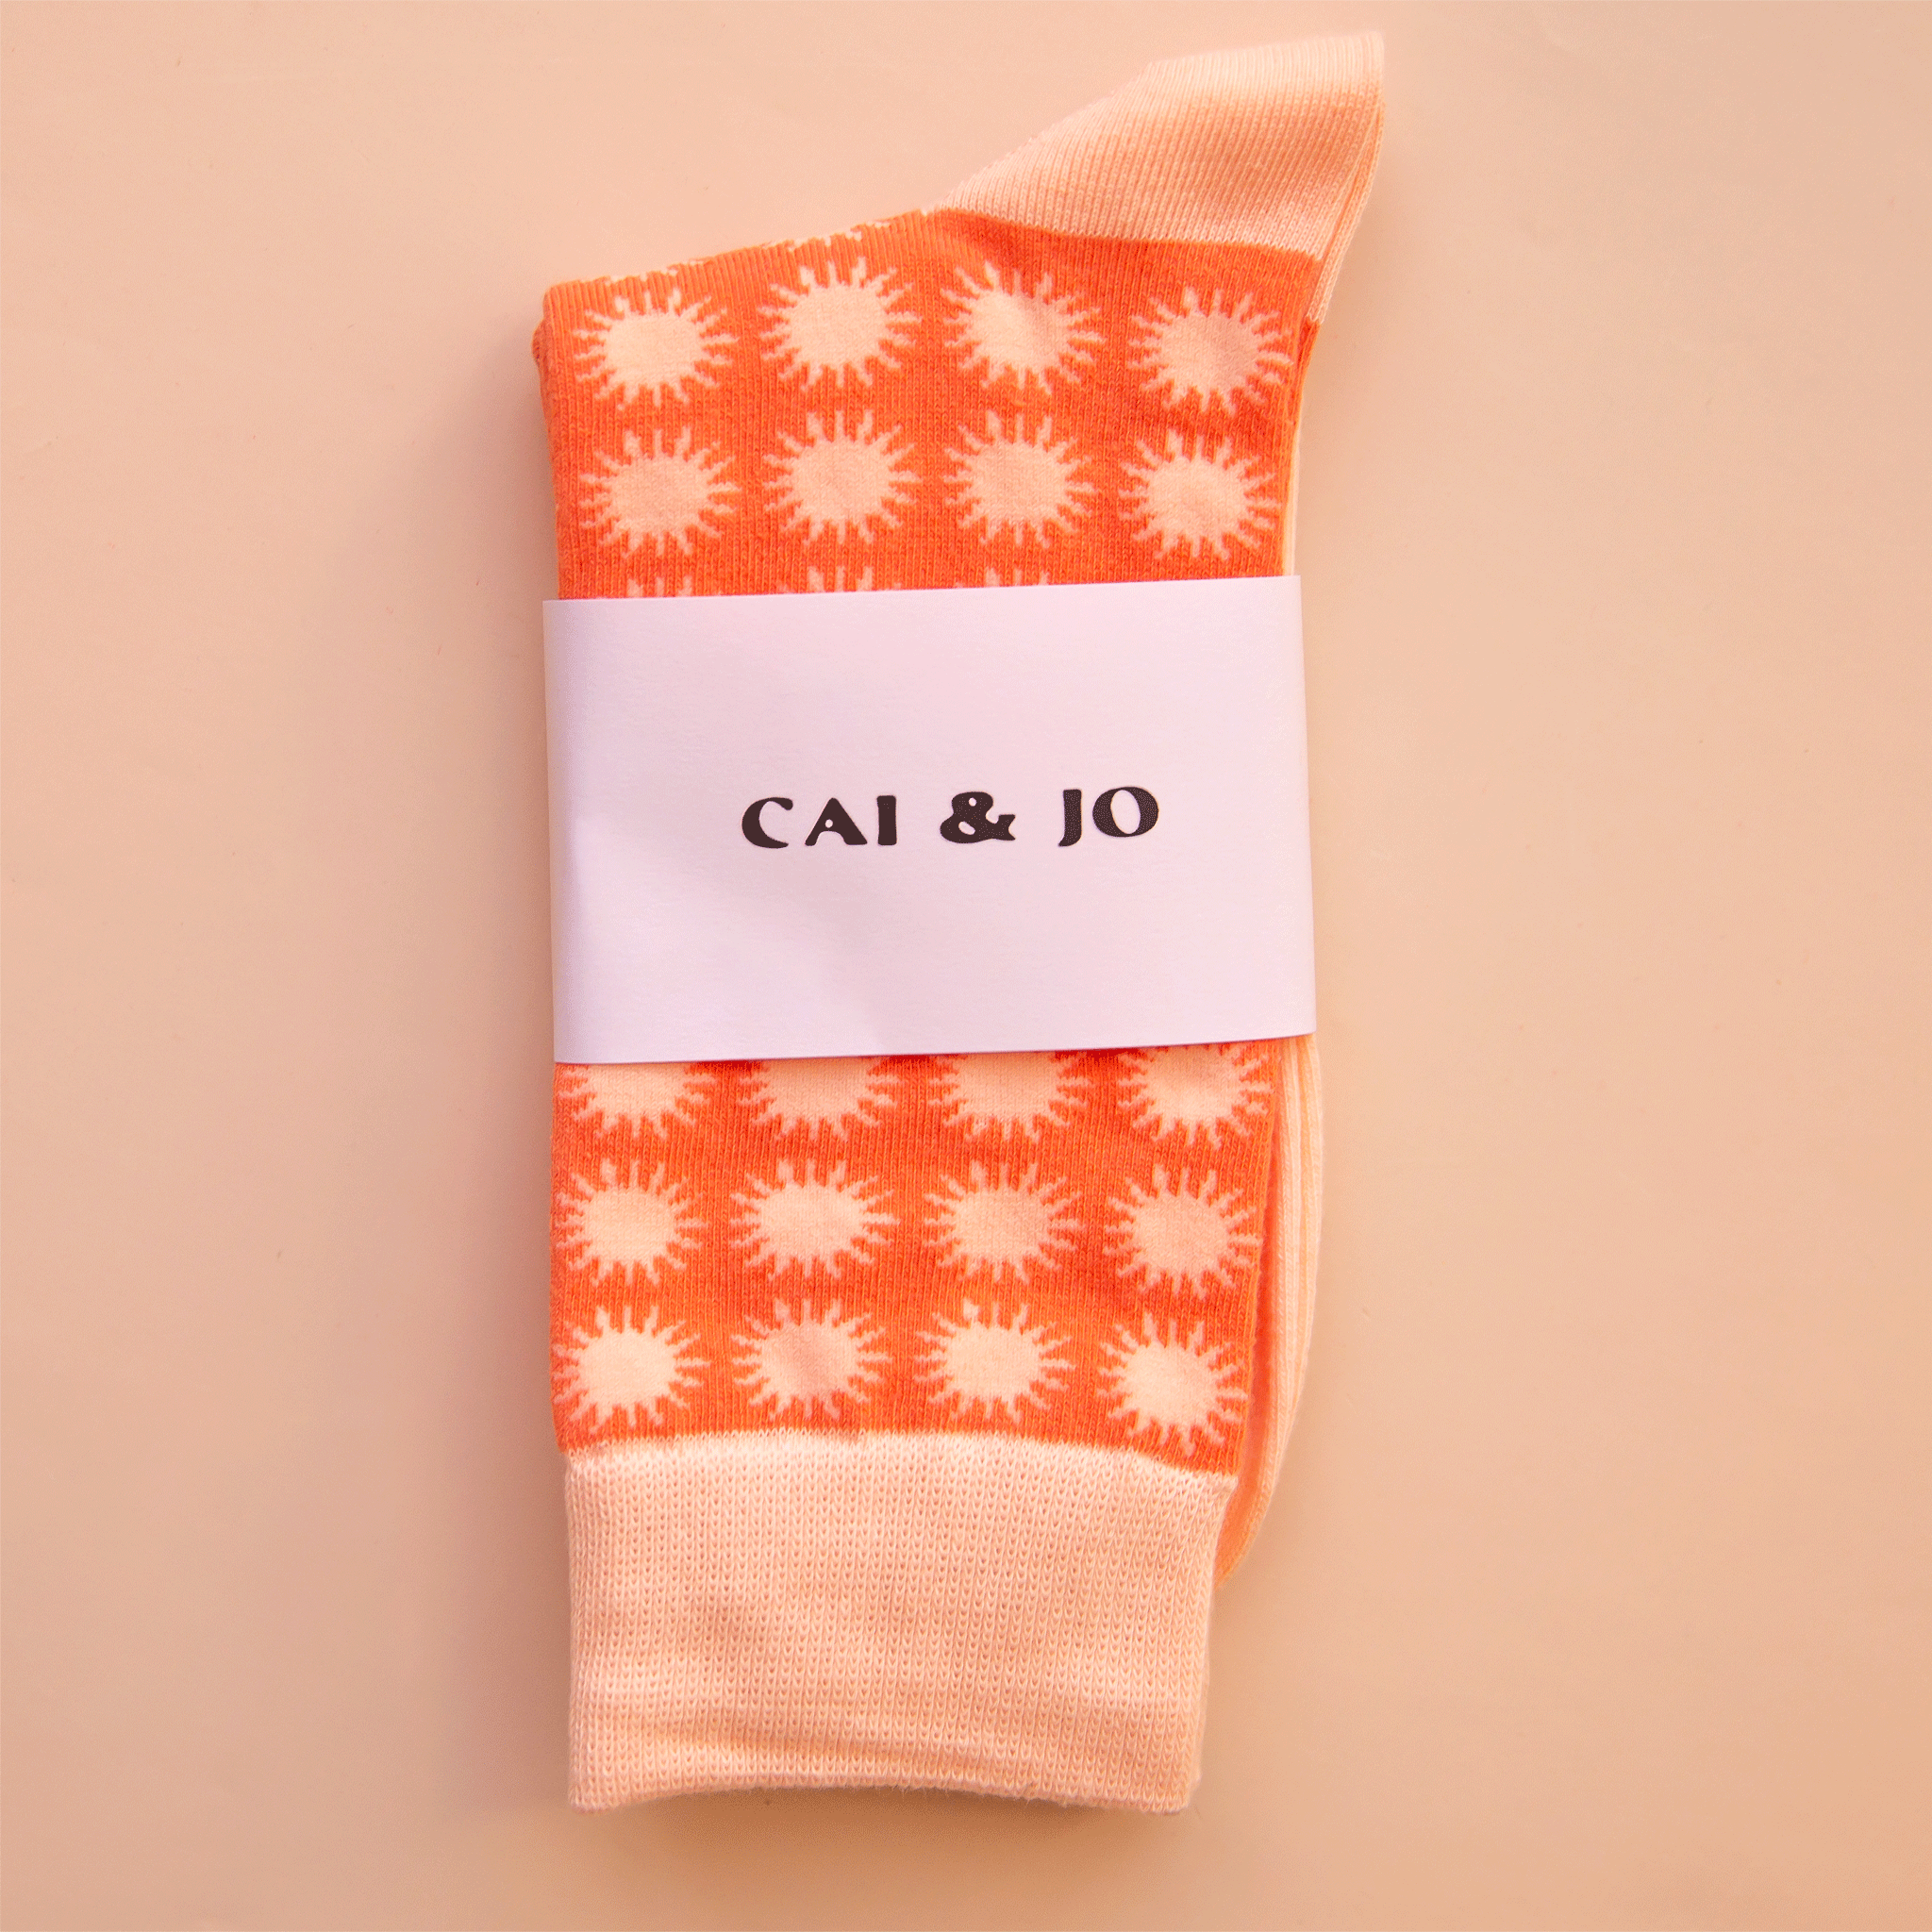 On a peach colored background is a pair of sunshine printed socks with an orange and light pink colorway.